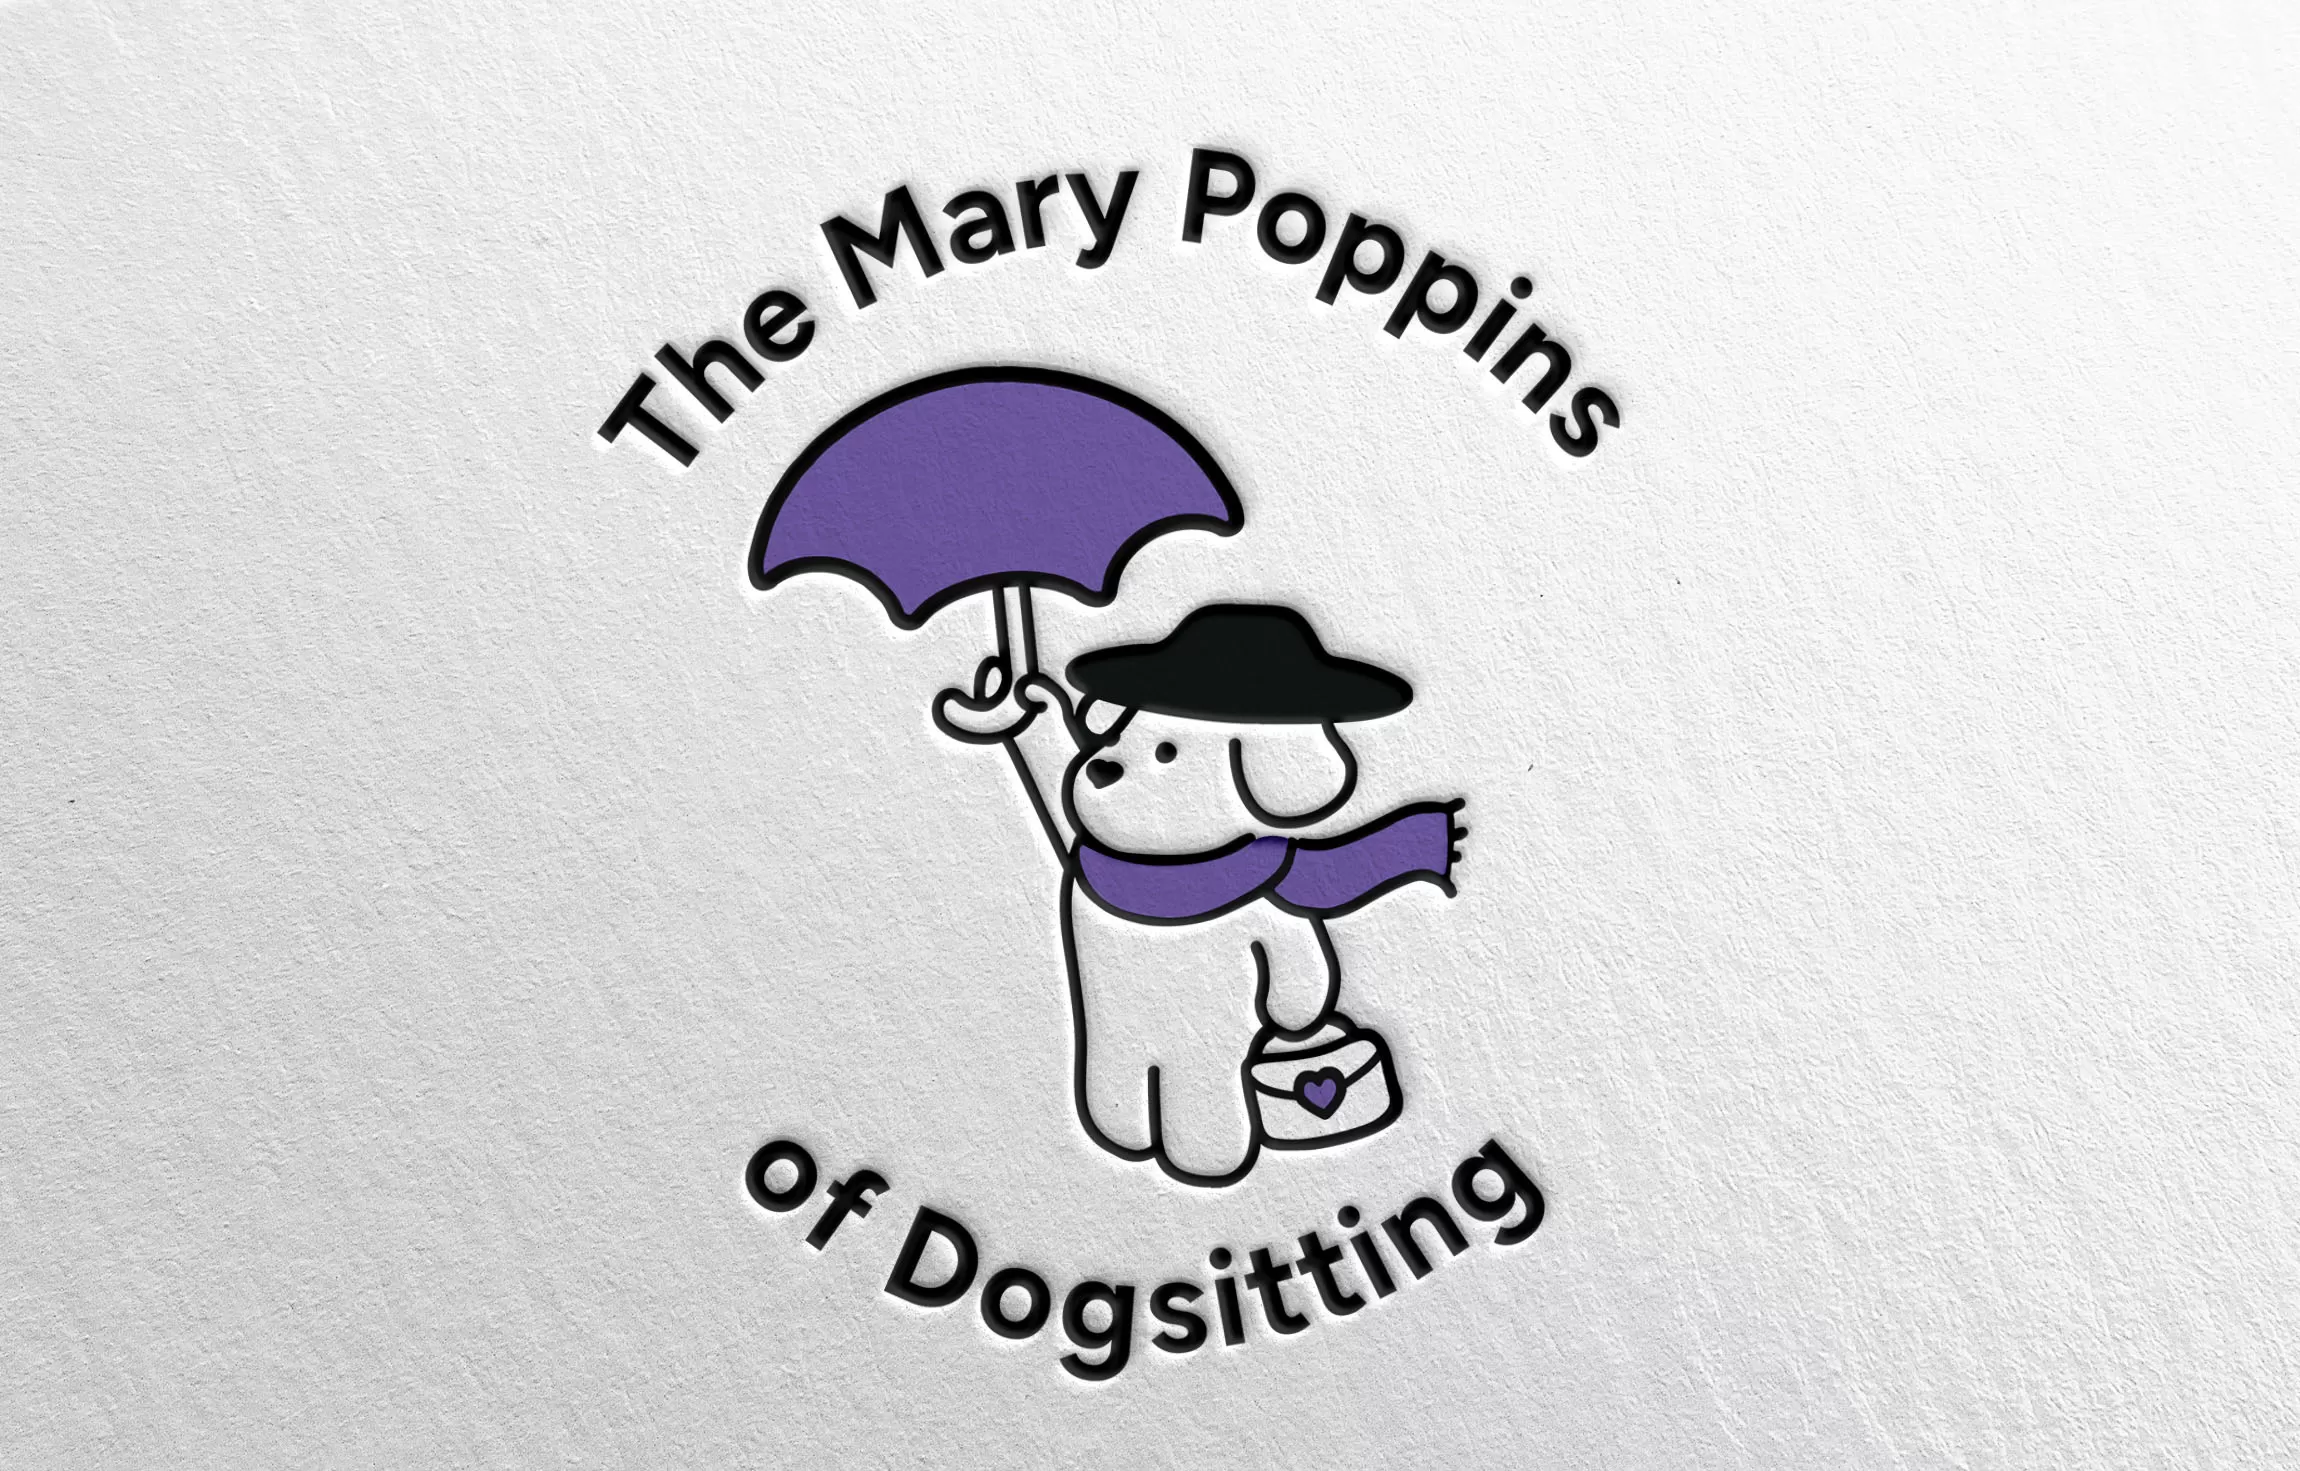 The Mary Poppins of Dogsitting